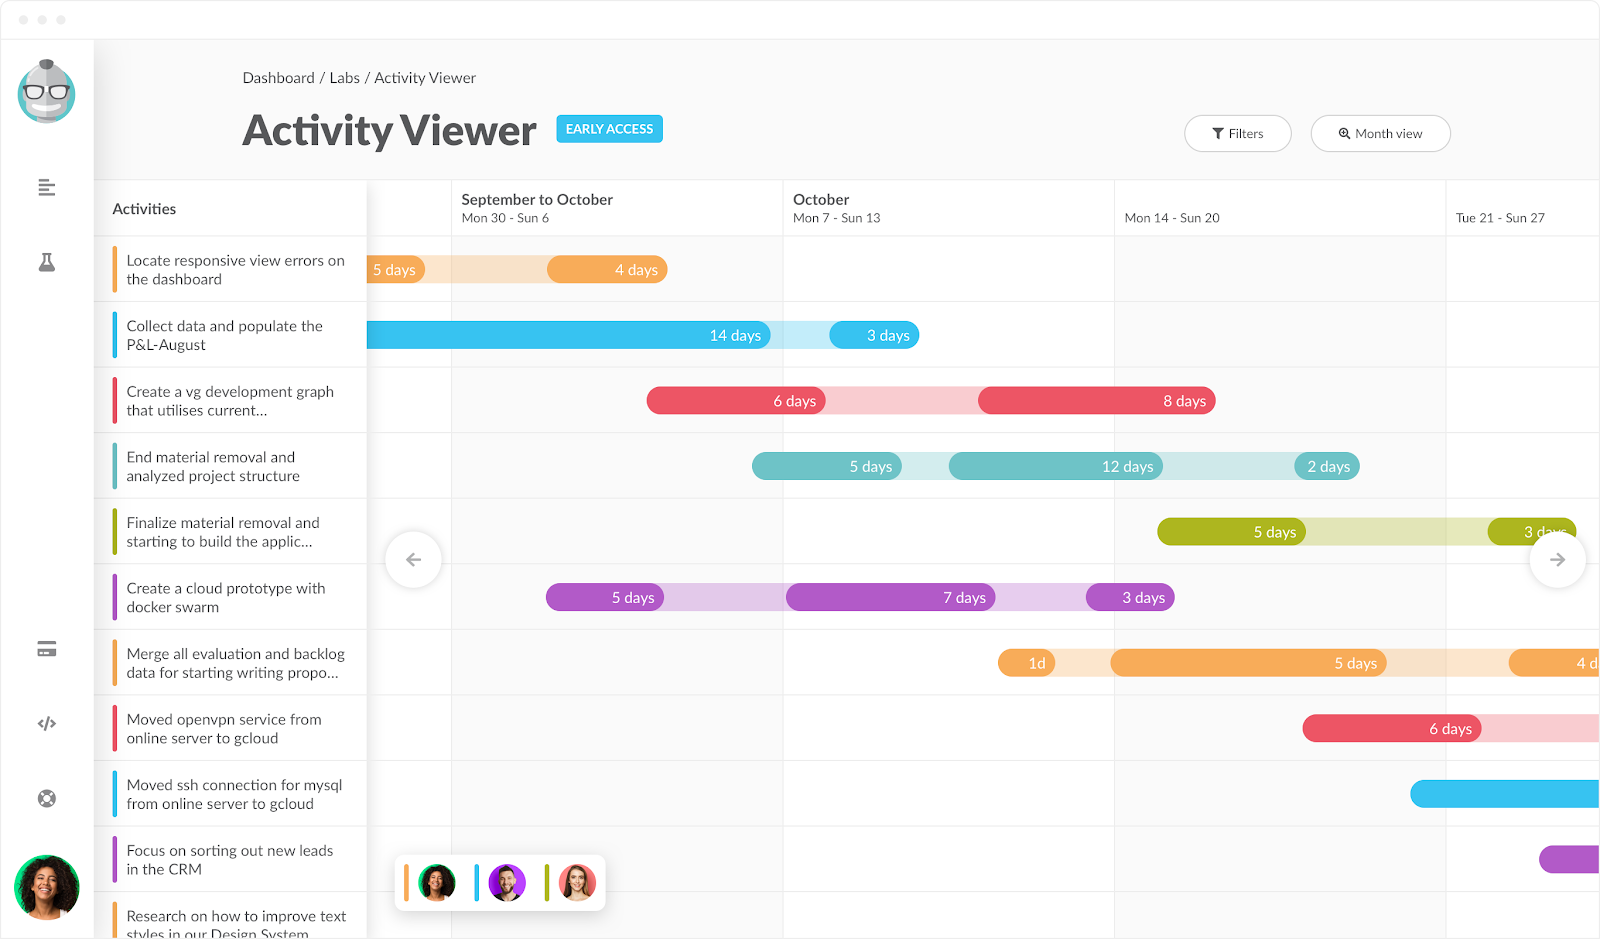 Activity Viewer for the Month within Geekbot's dashboard